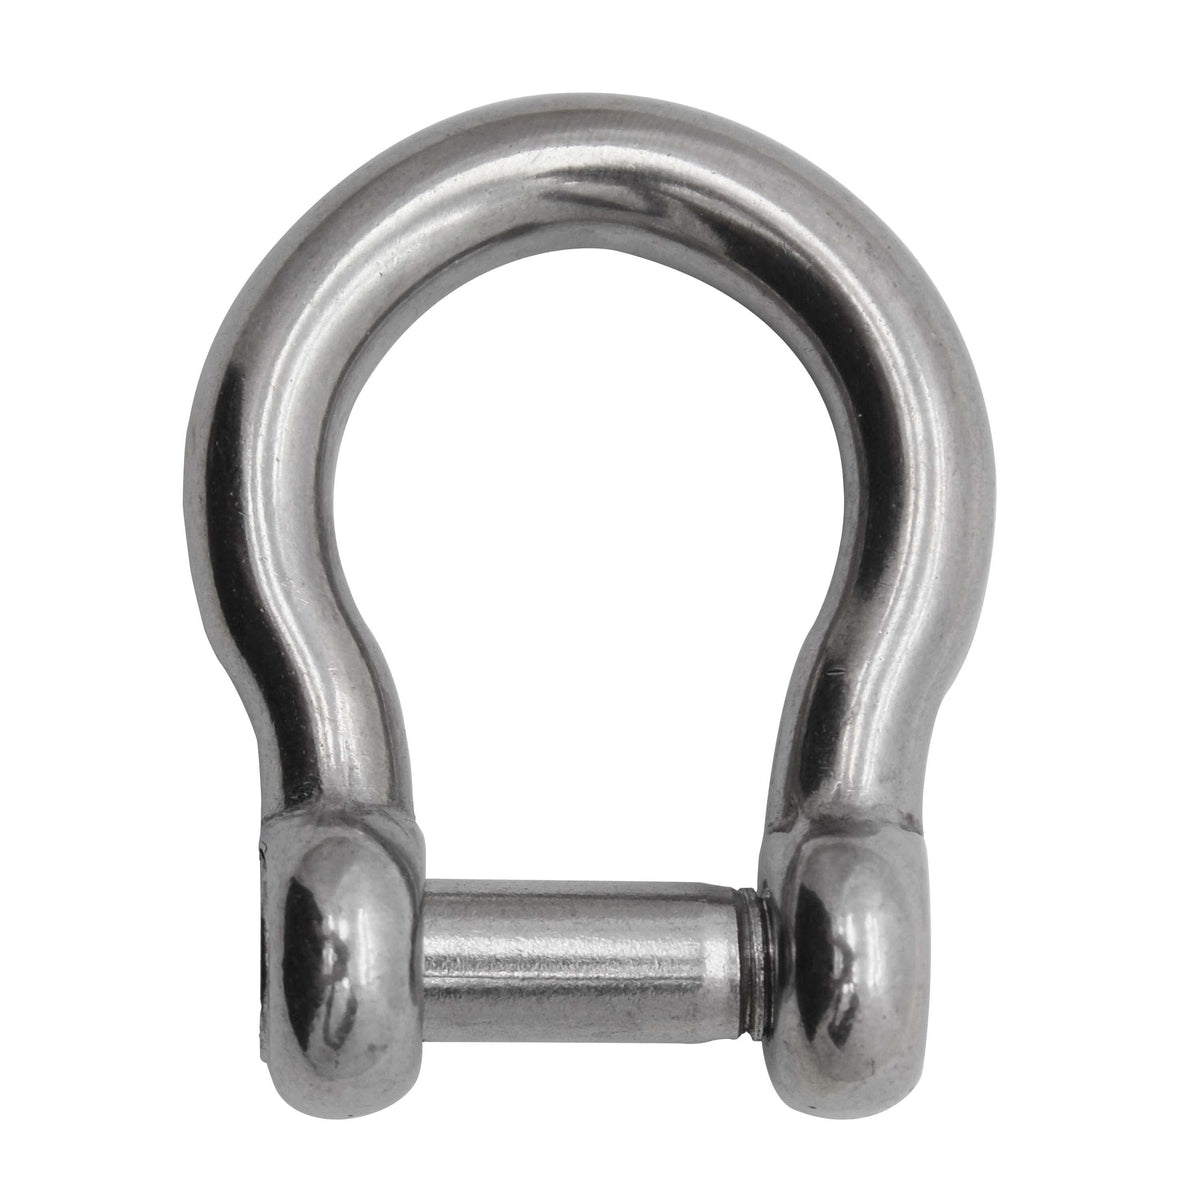 Extreme Max BoatTector SS Bow Shackle with No-Snag Pin 1/4" #3006.8405